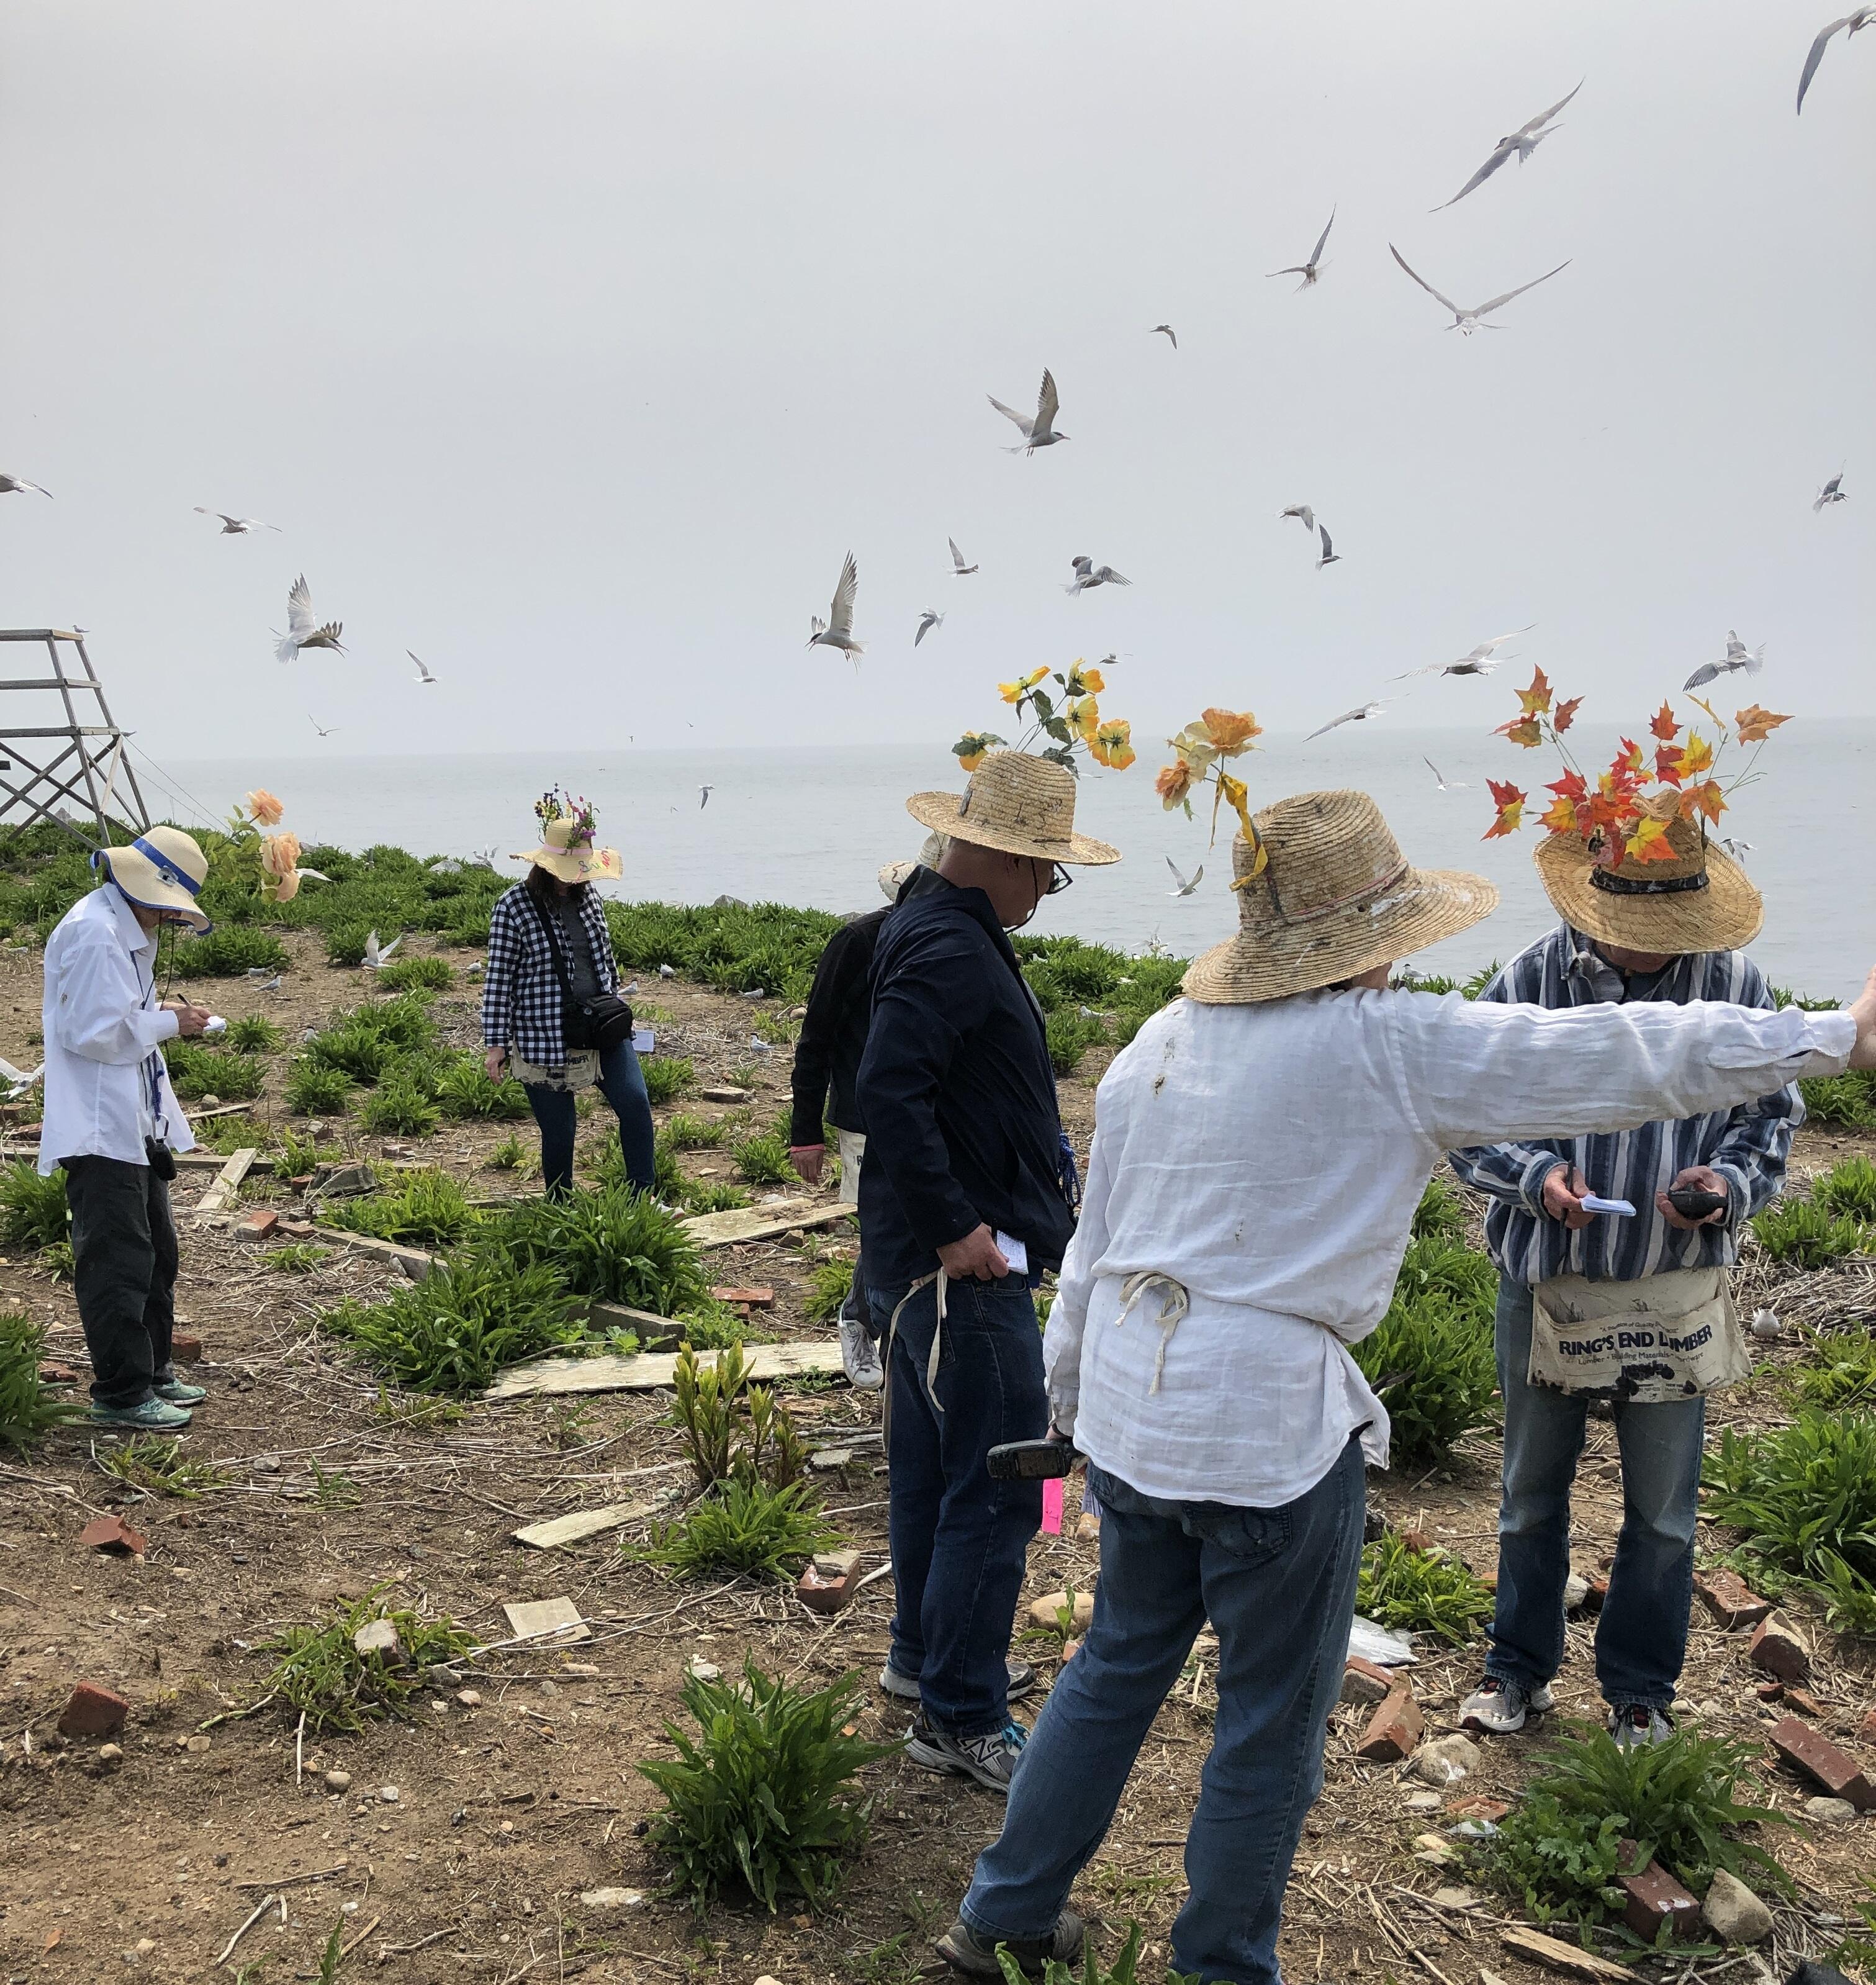 Trained volunteers at Great Gull Island map nest locations of Roseate and Common Terns while being dive-bombed. Their hats act as a distraction so the birds don't hit their heads!